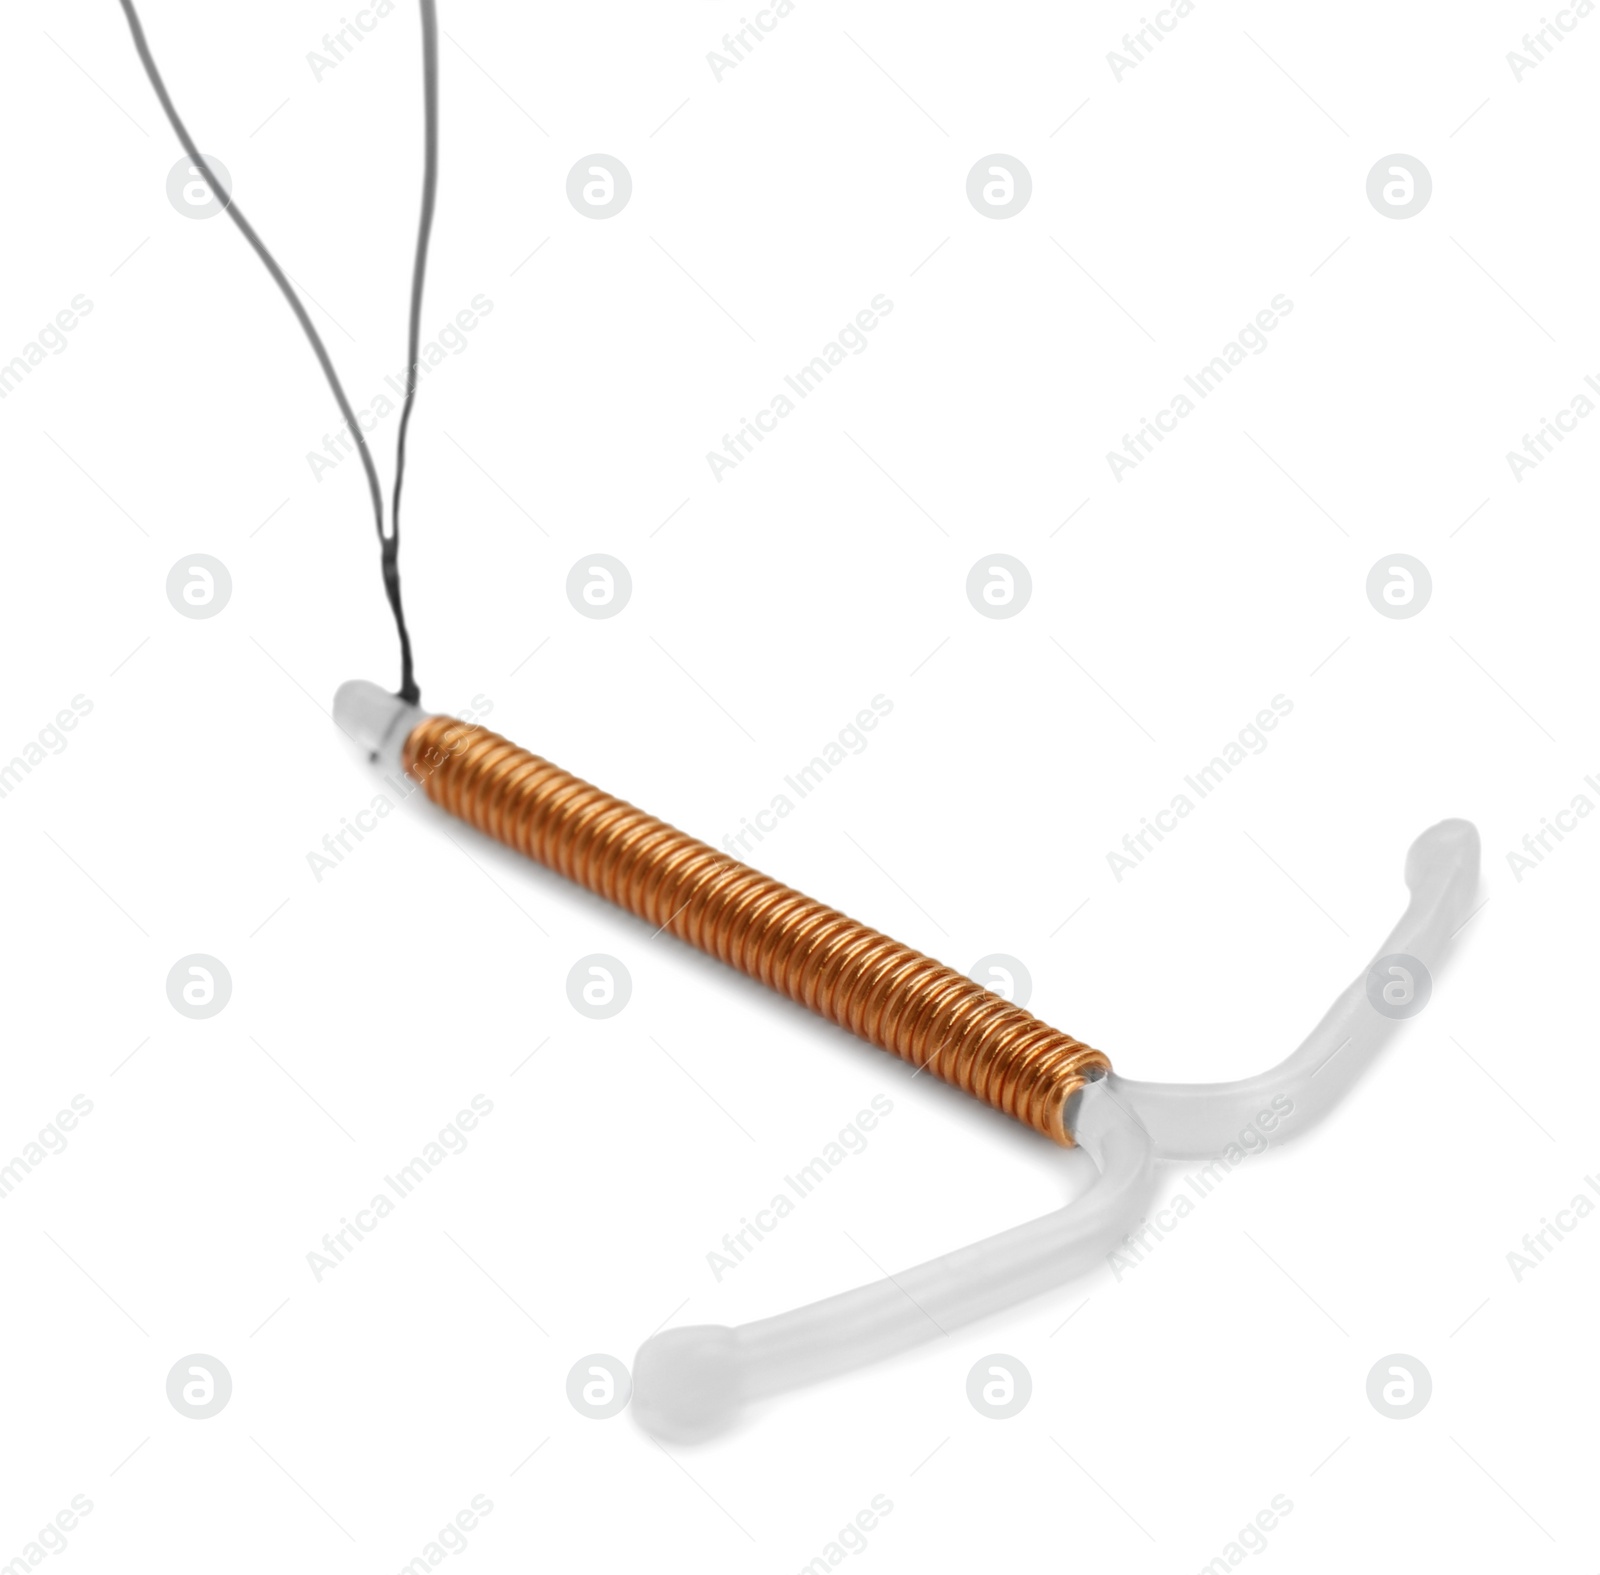 Photo of T-shaped intrauterine birth control device on white background